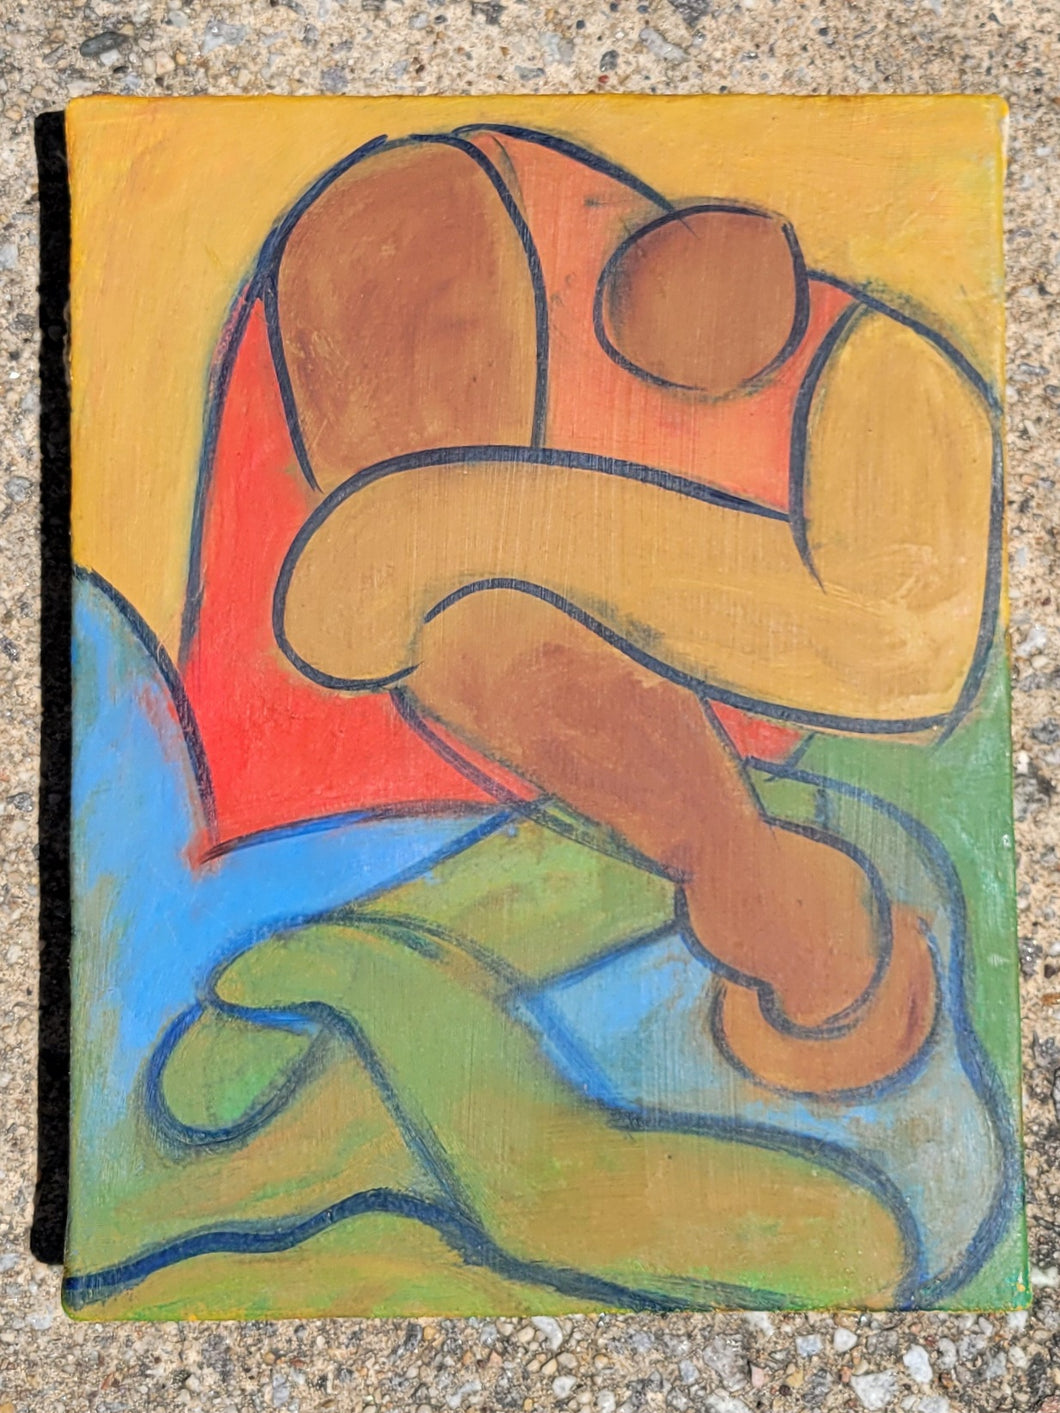 Figural Abstract, Oil on Canvas